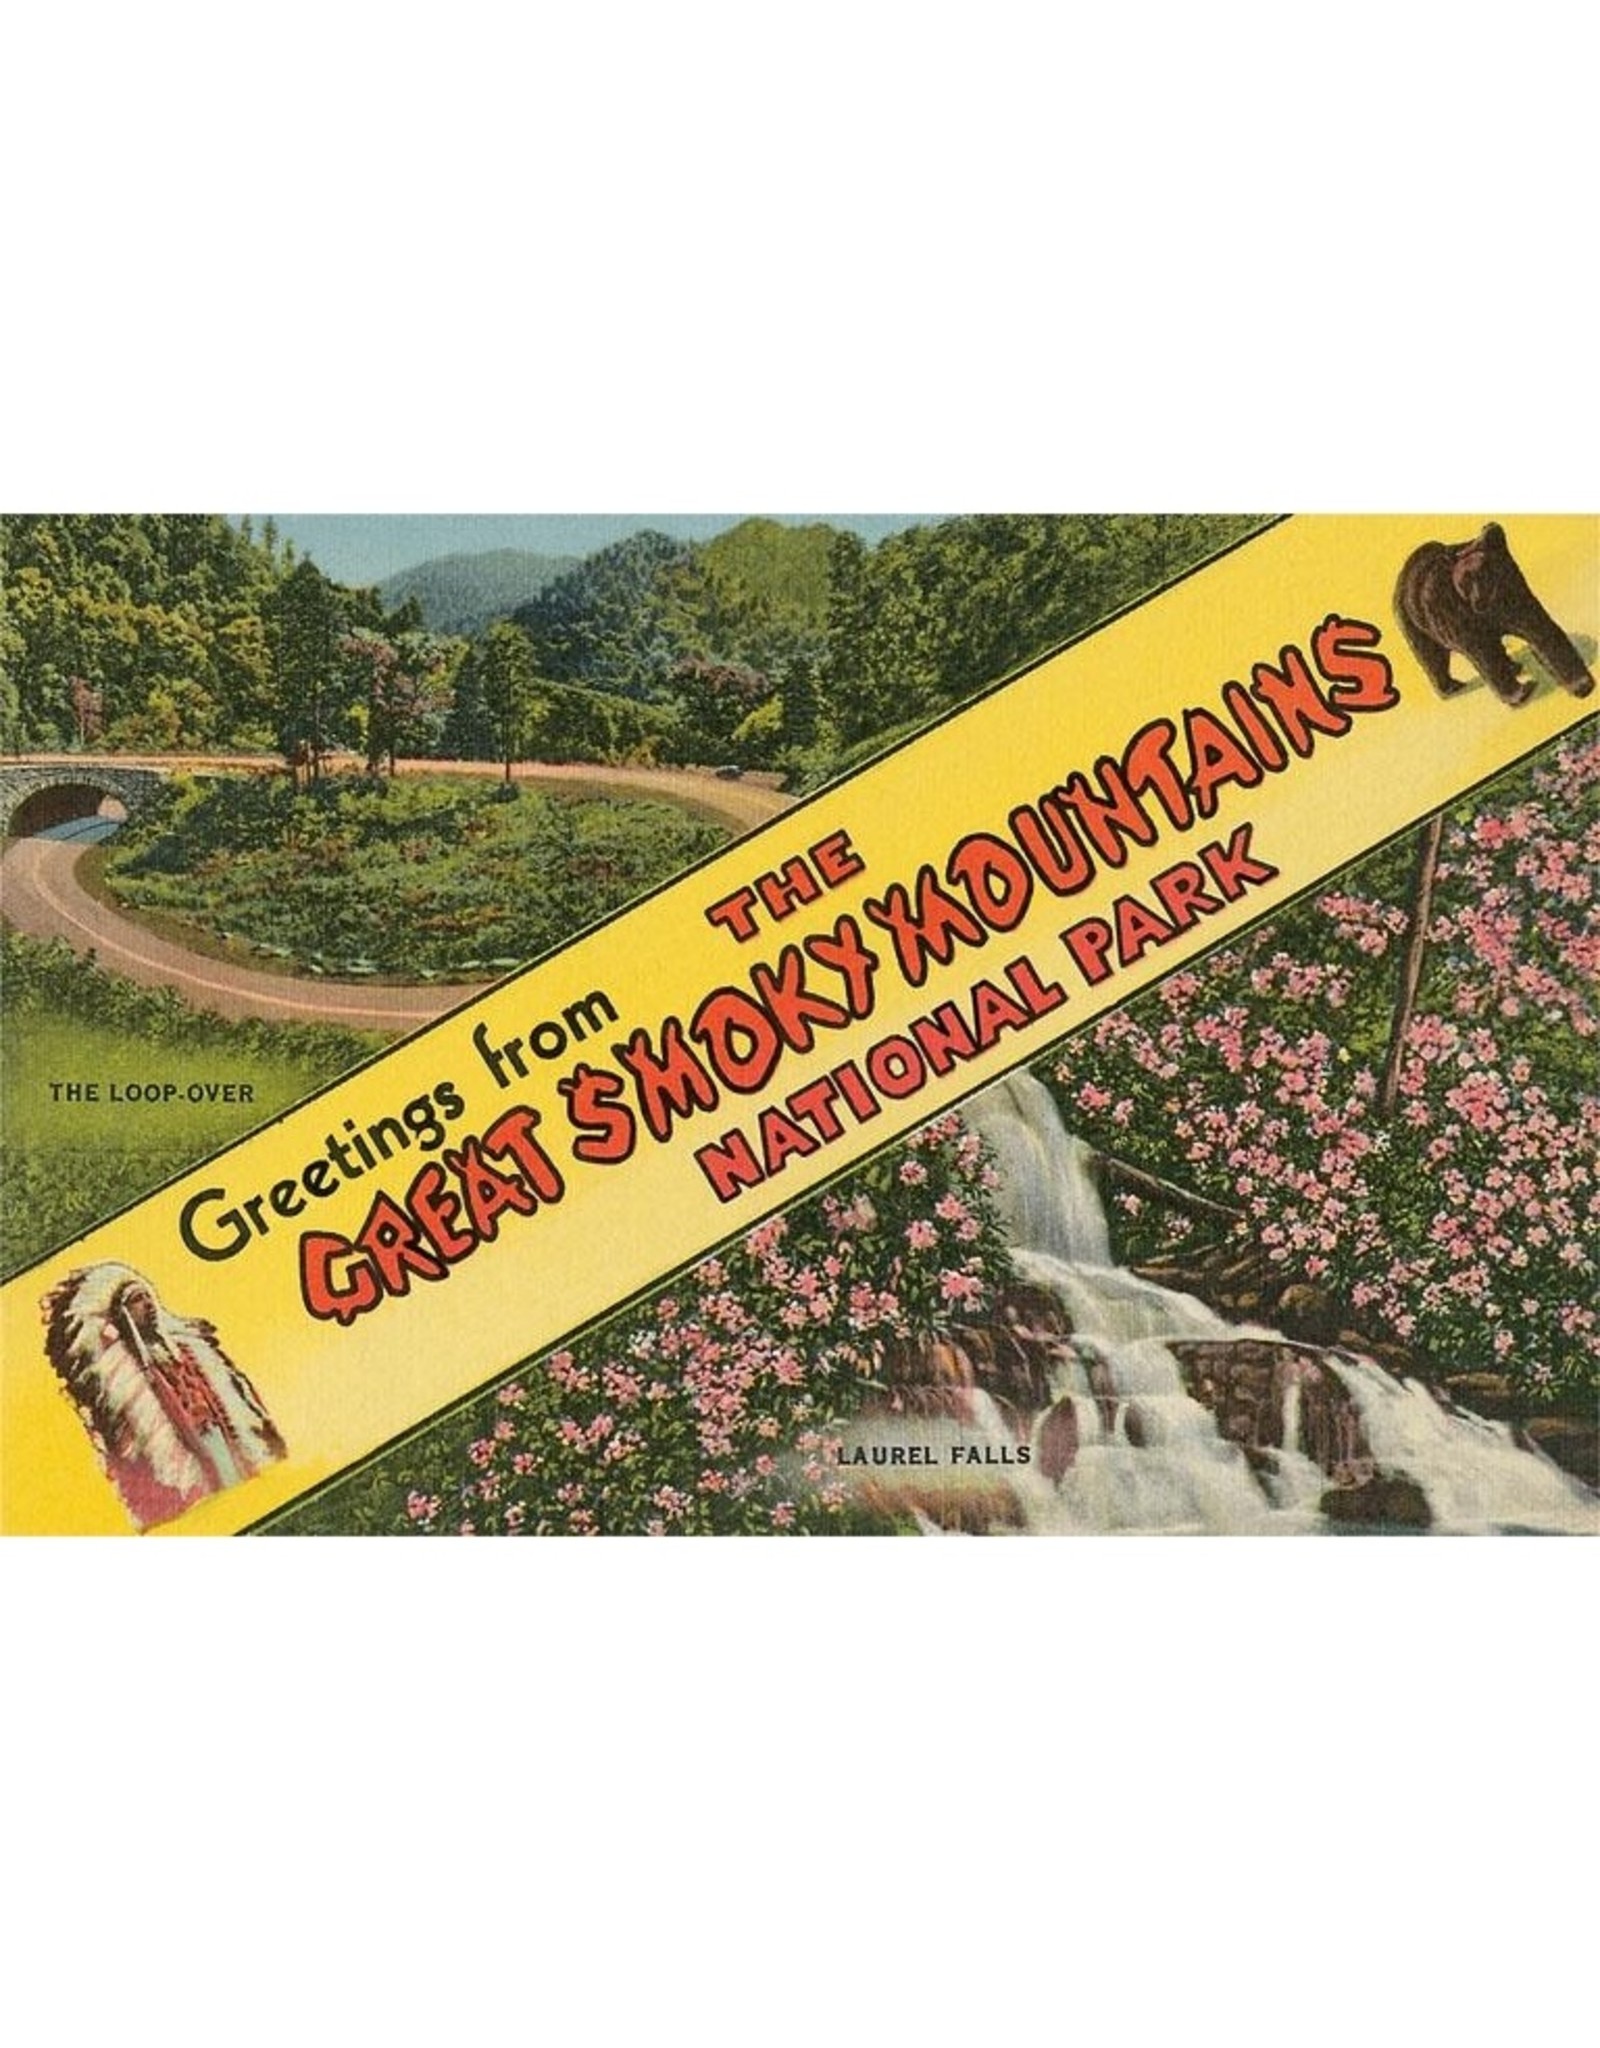 Greetings From Smoky Mountains - Vintage Image Postcard